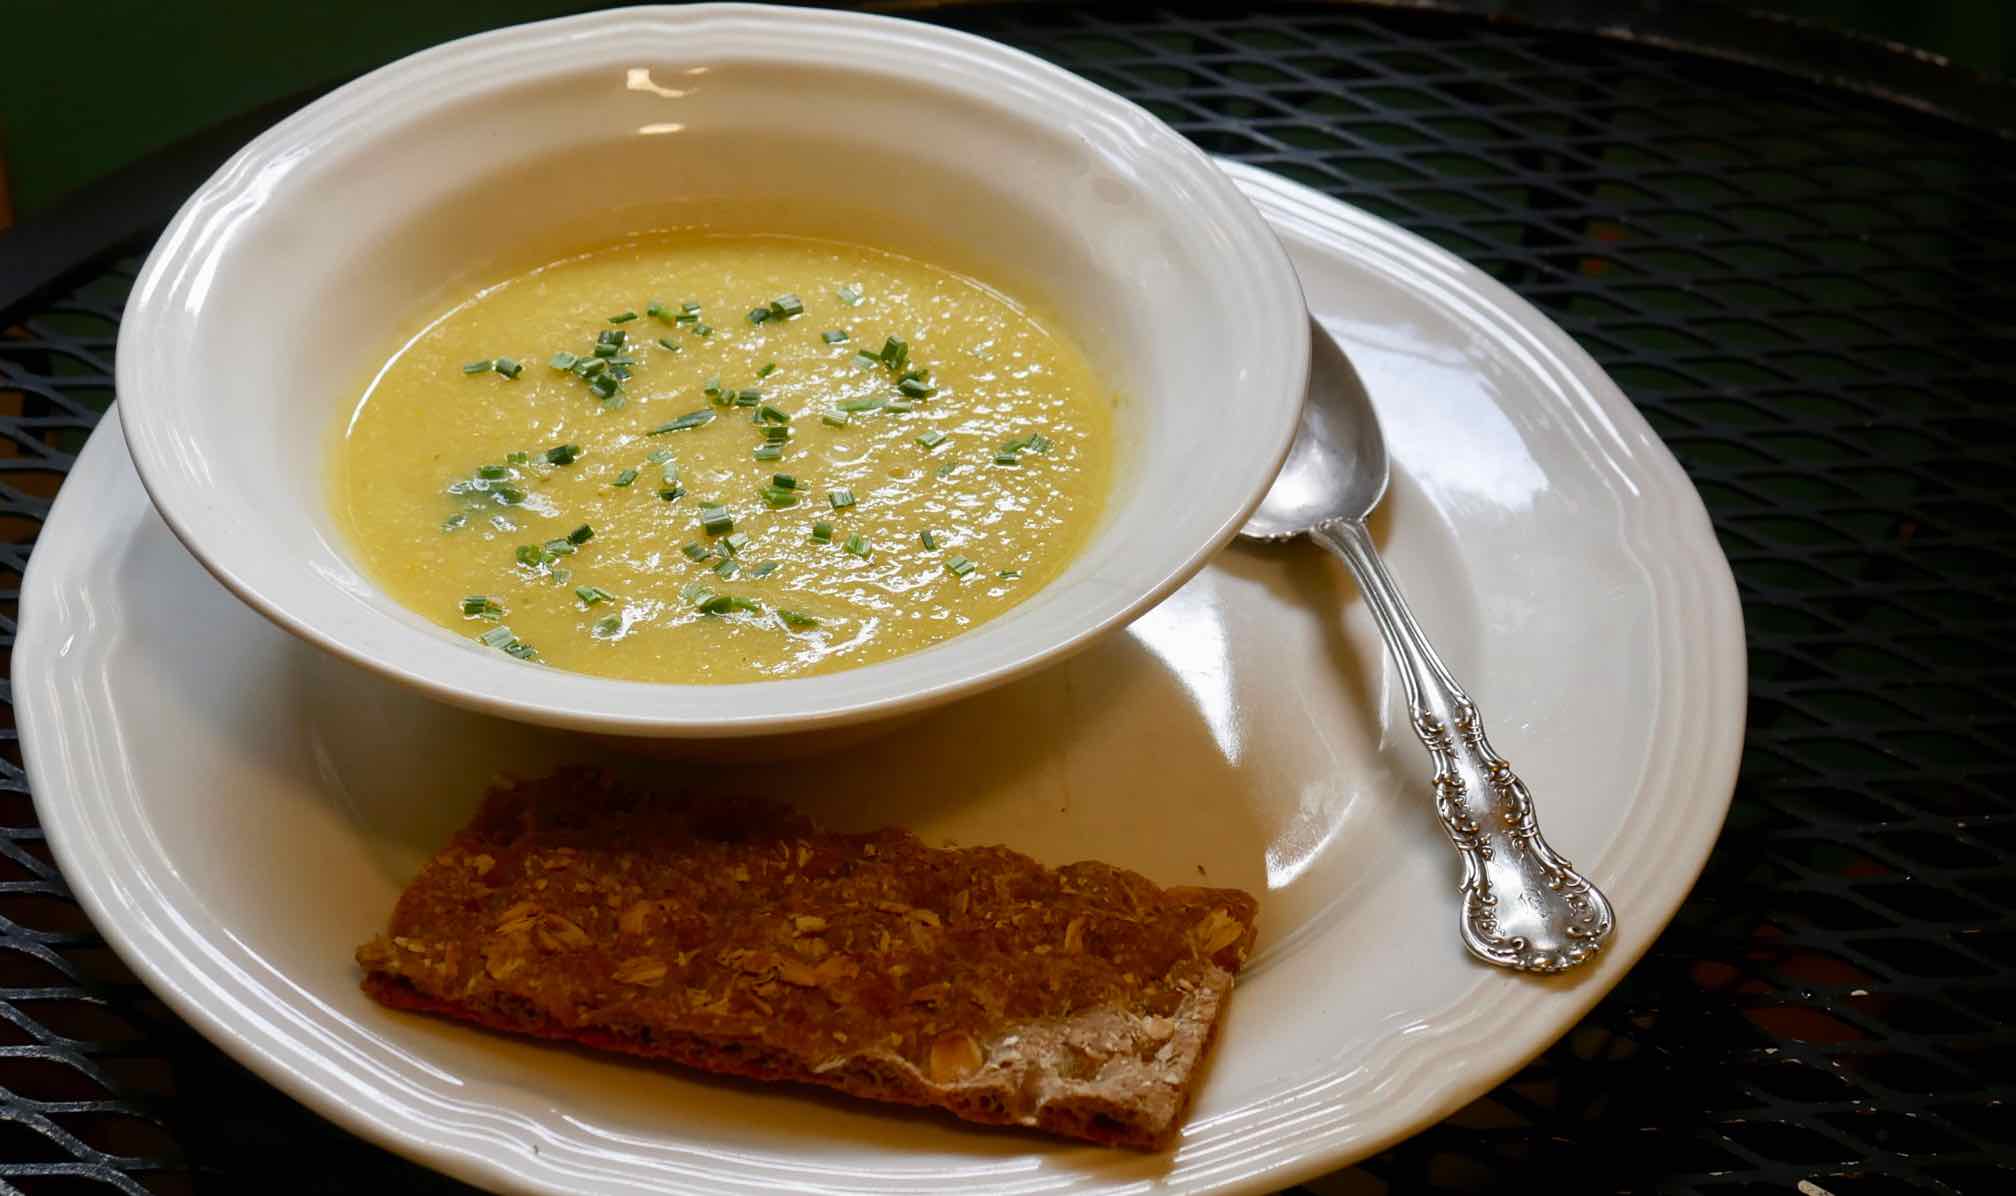 Soup made with large yellow squash garnished with chopped chives